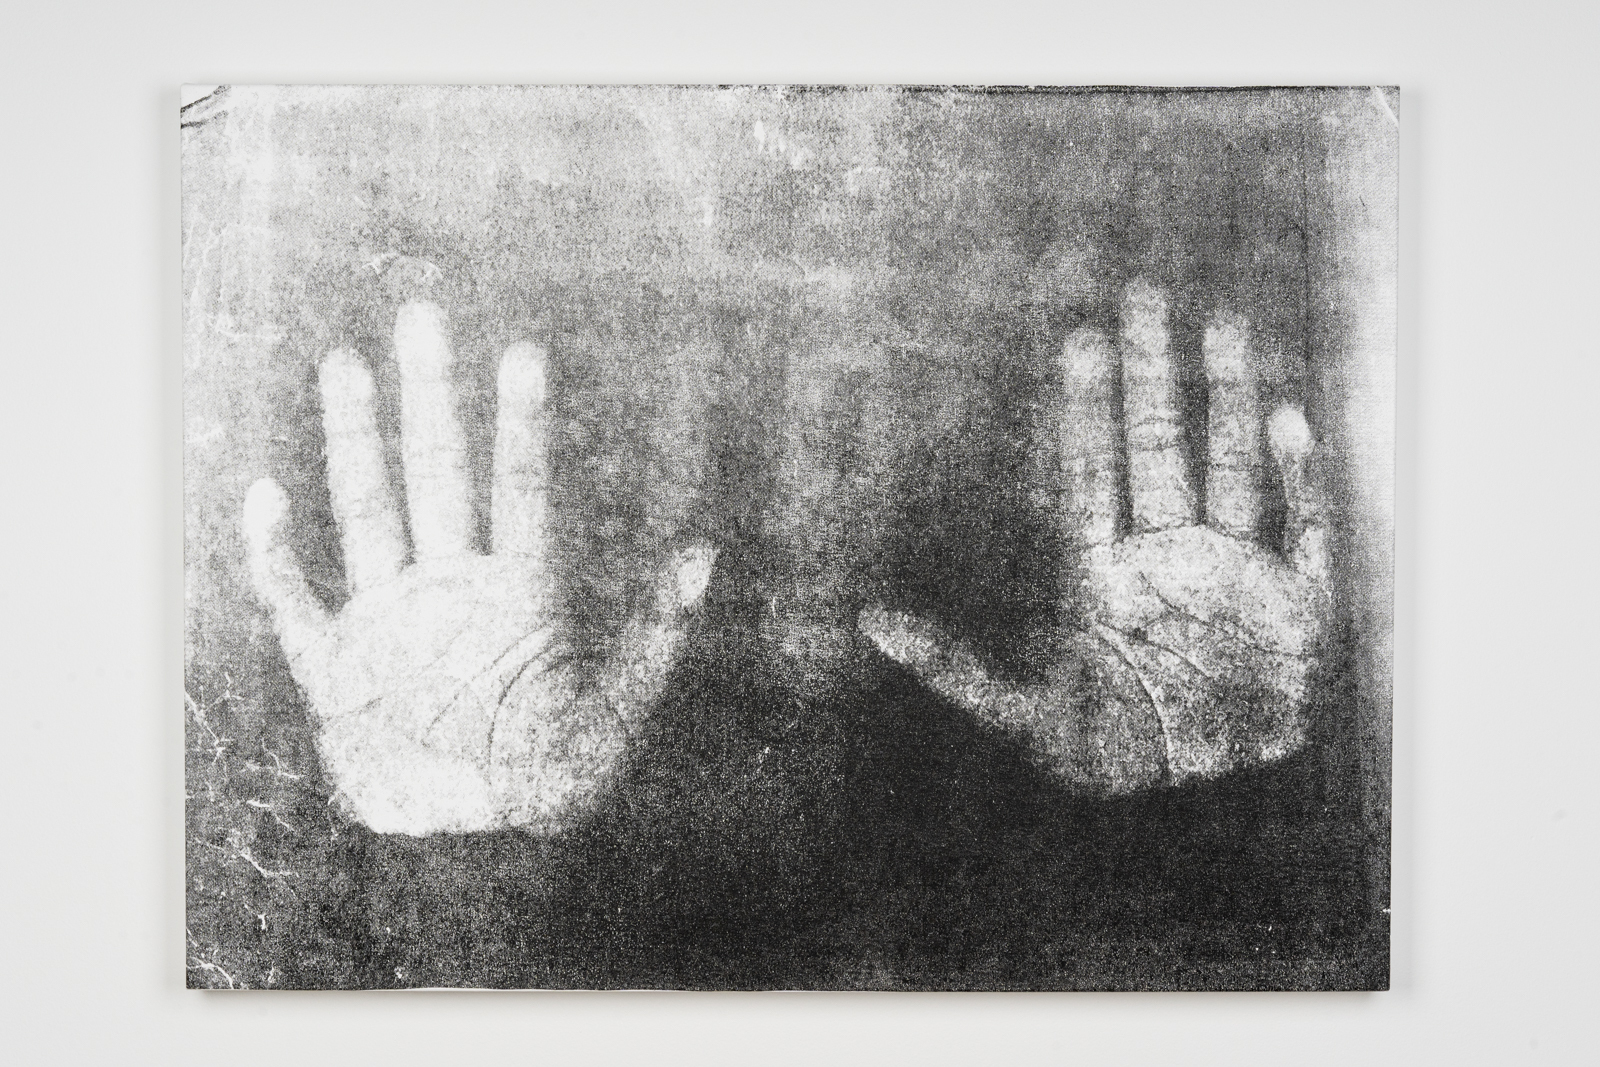 A large screenprint of two hands with palms facing the viewer by artist Leslie Diuguid